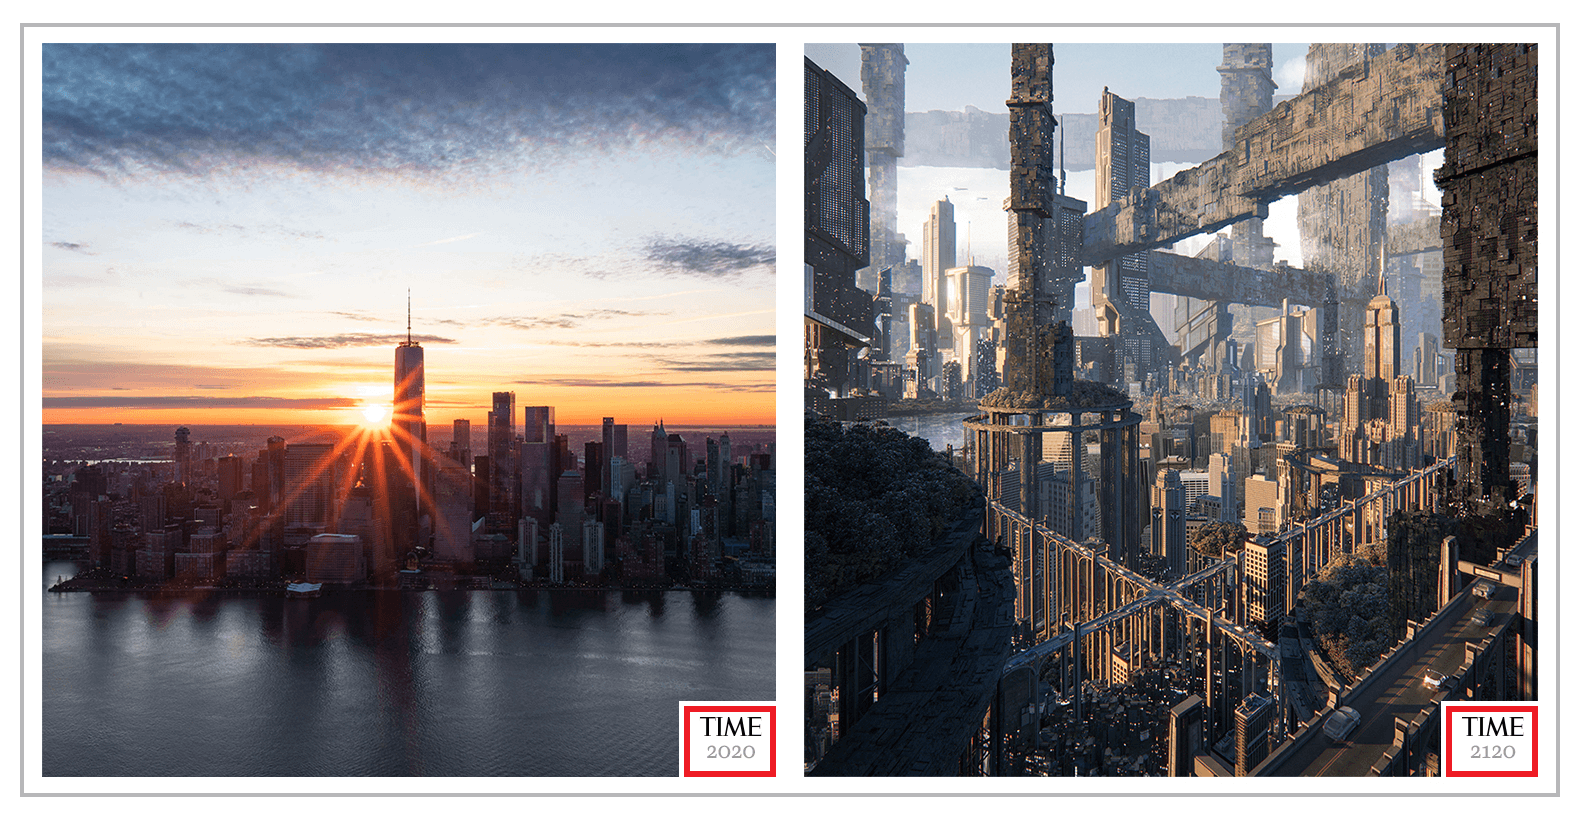 As the World Turns, 2020 by Isaac "Drift" Wright & Highgardens of NYC, 2120 by Idil Dursun